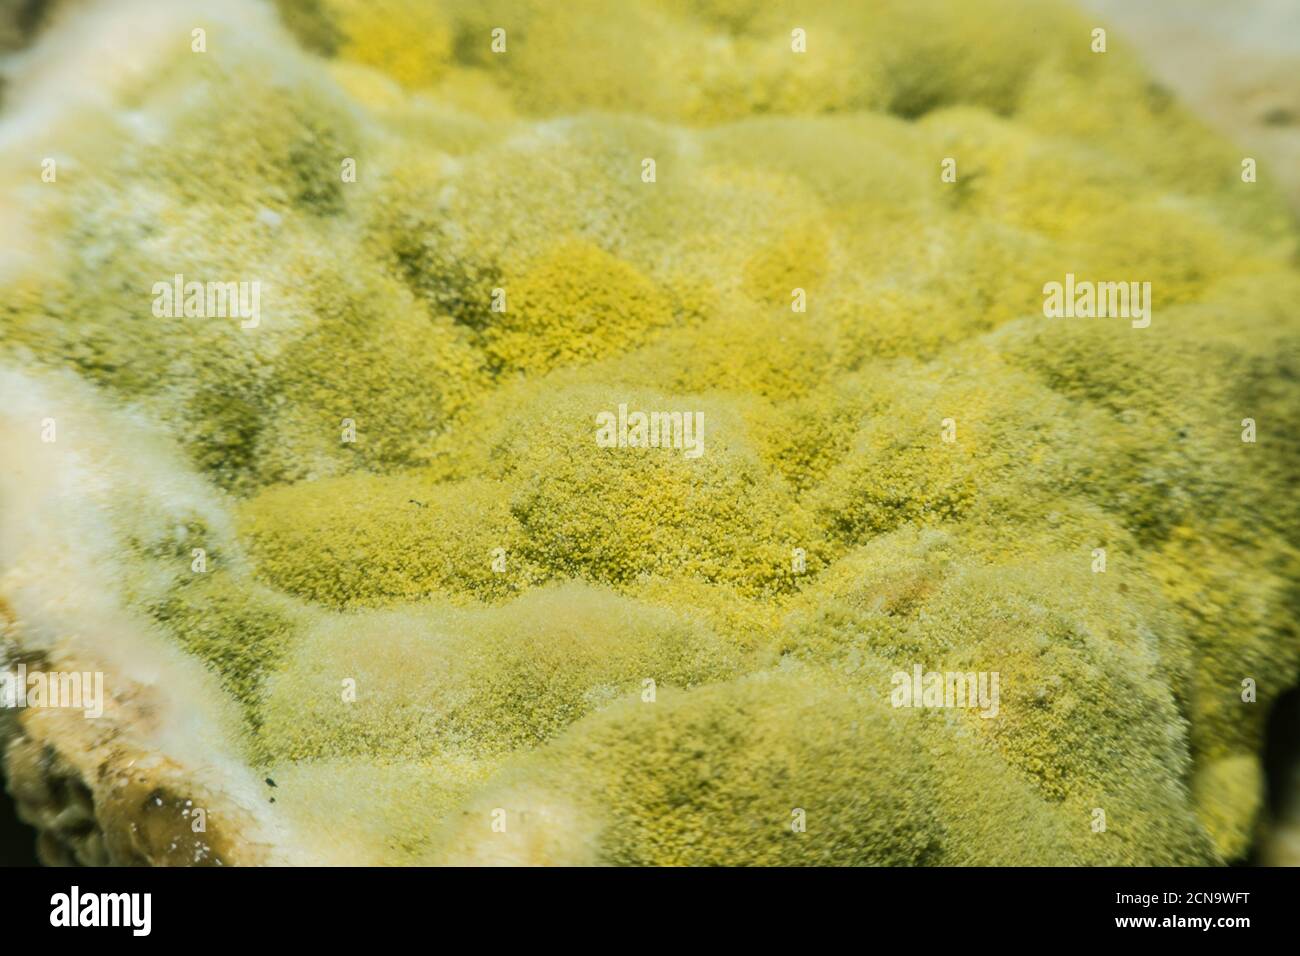 Spread of green fungal mold on spoiled food products. Stock Photo